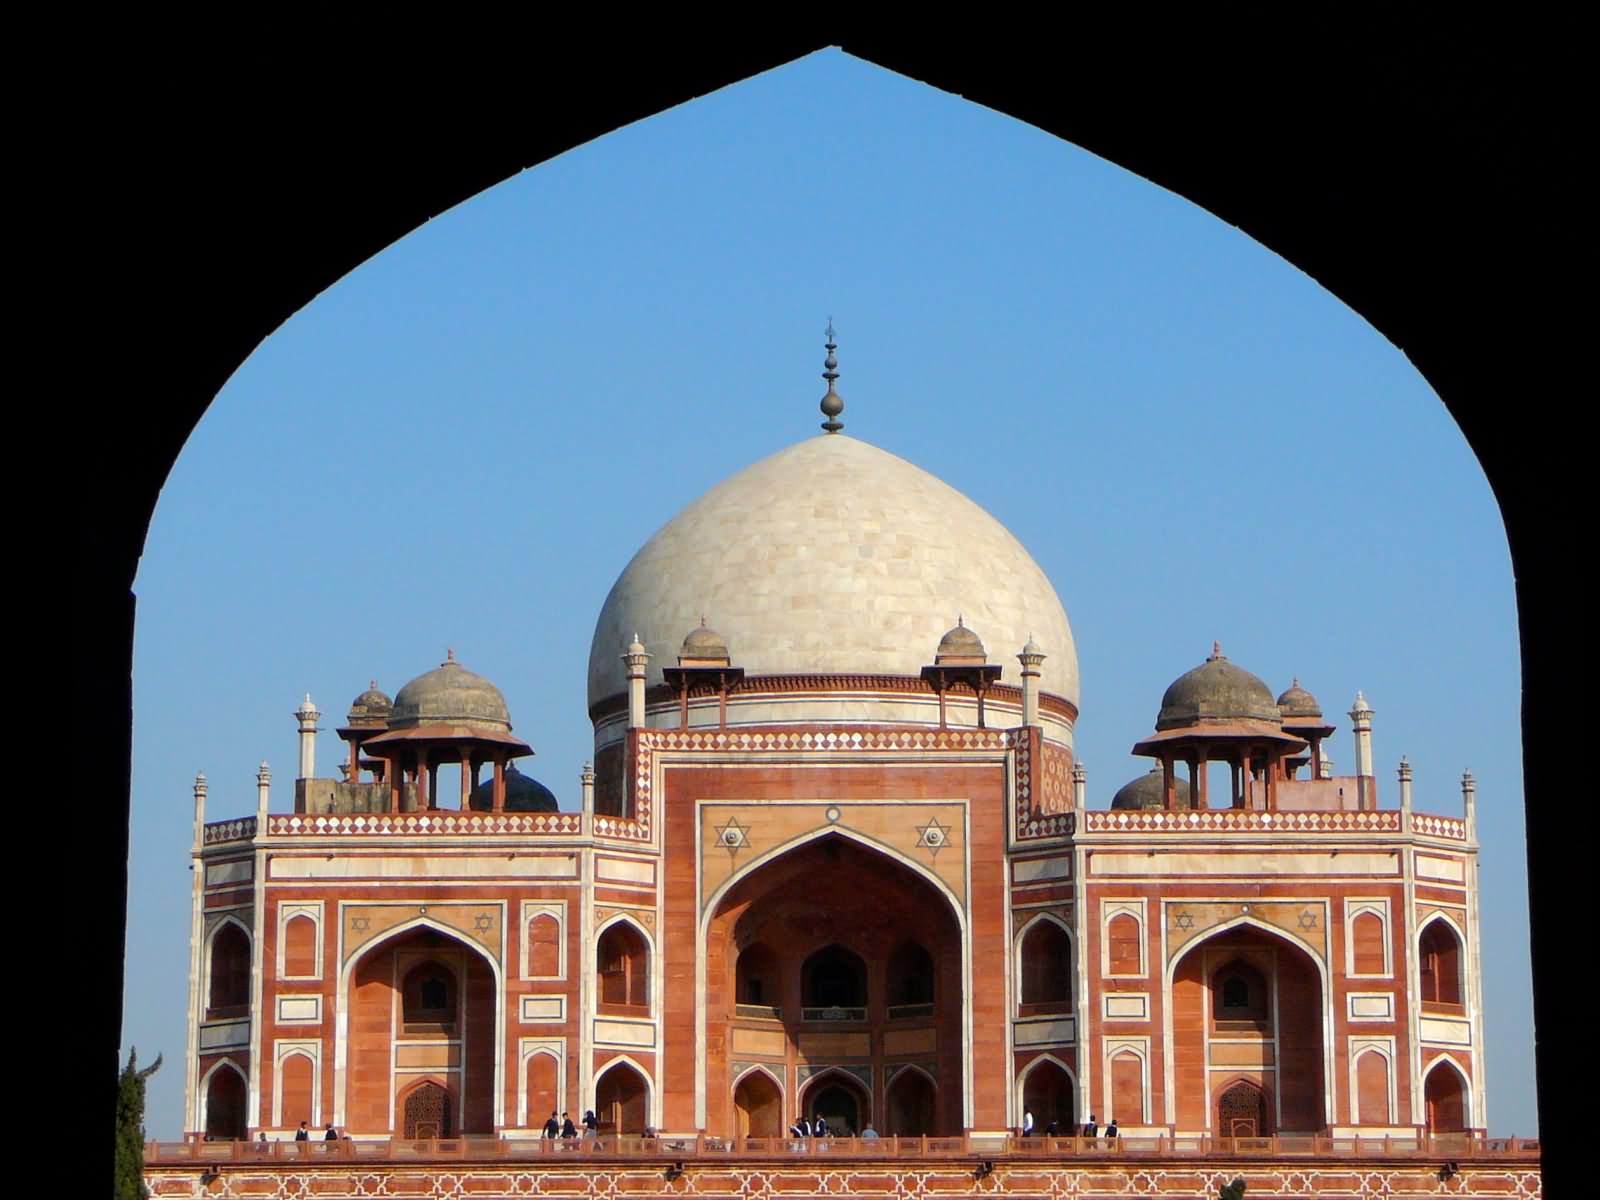 Humayun's Tomb View From Entrance